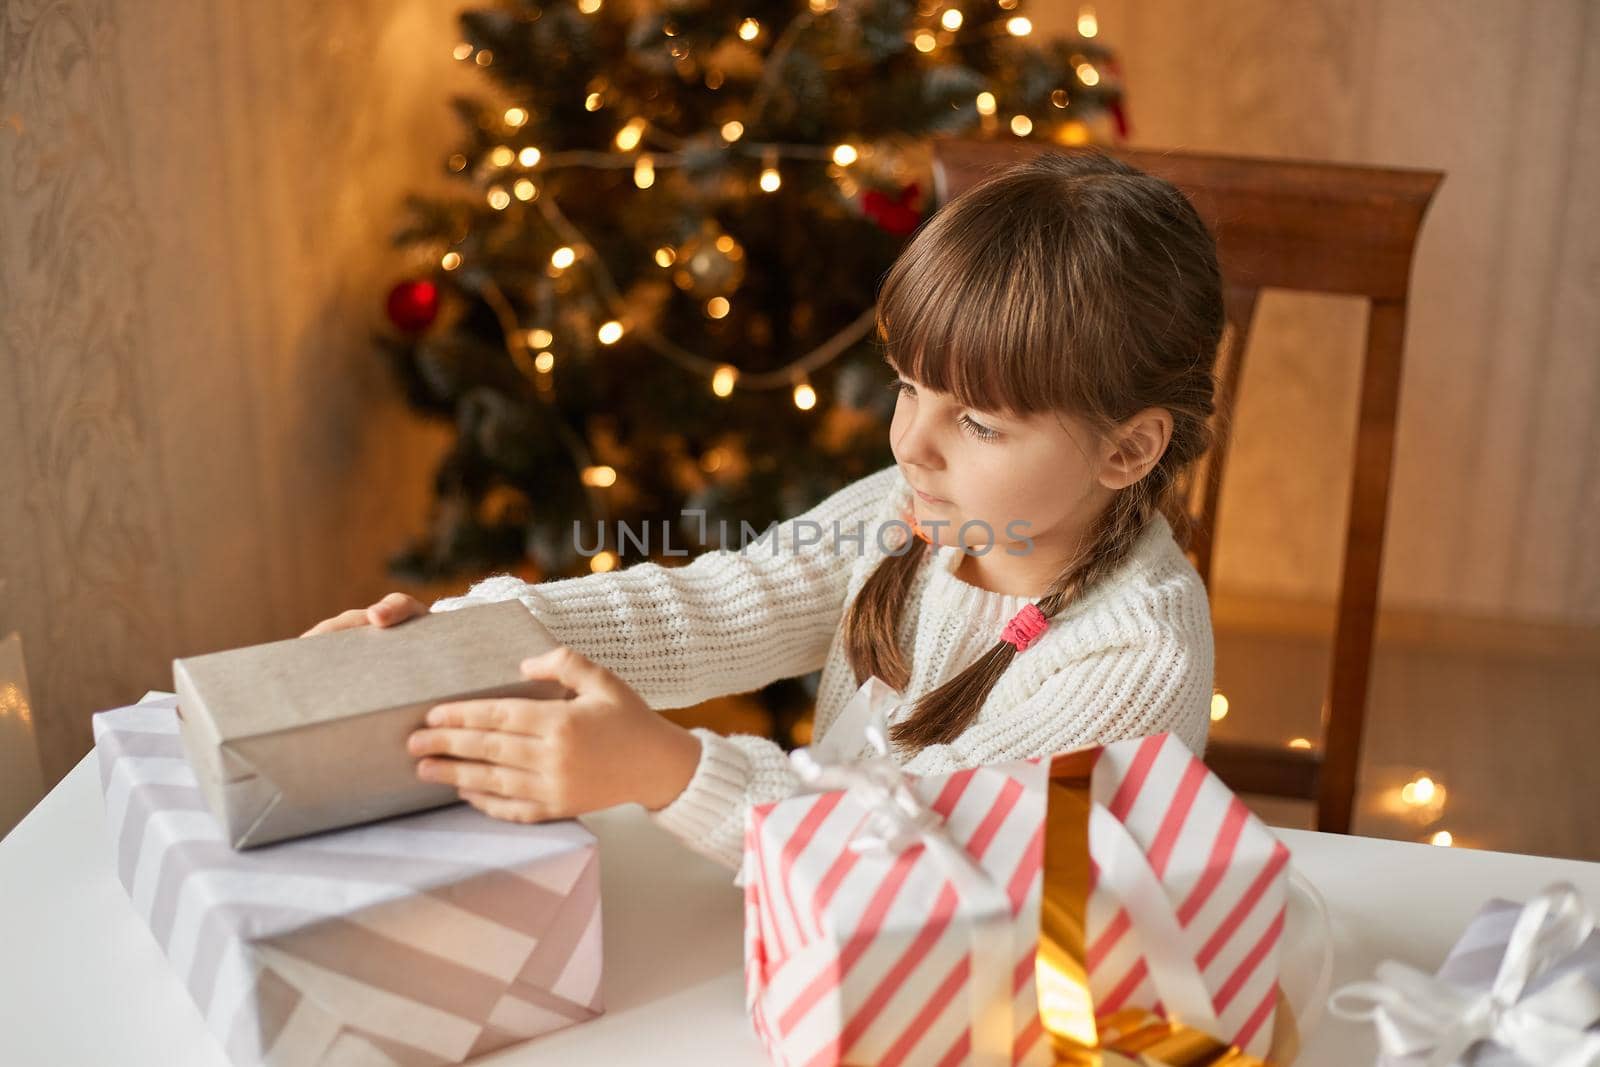 Girl packing christmas presents, sitting at table, dresses white sweater, has pigtails, looks at box in her hands, posing in festive room with fir tree and lights on background. by sementsovalesia